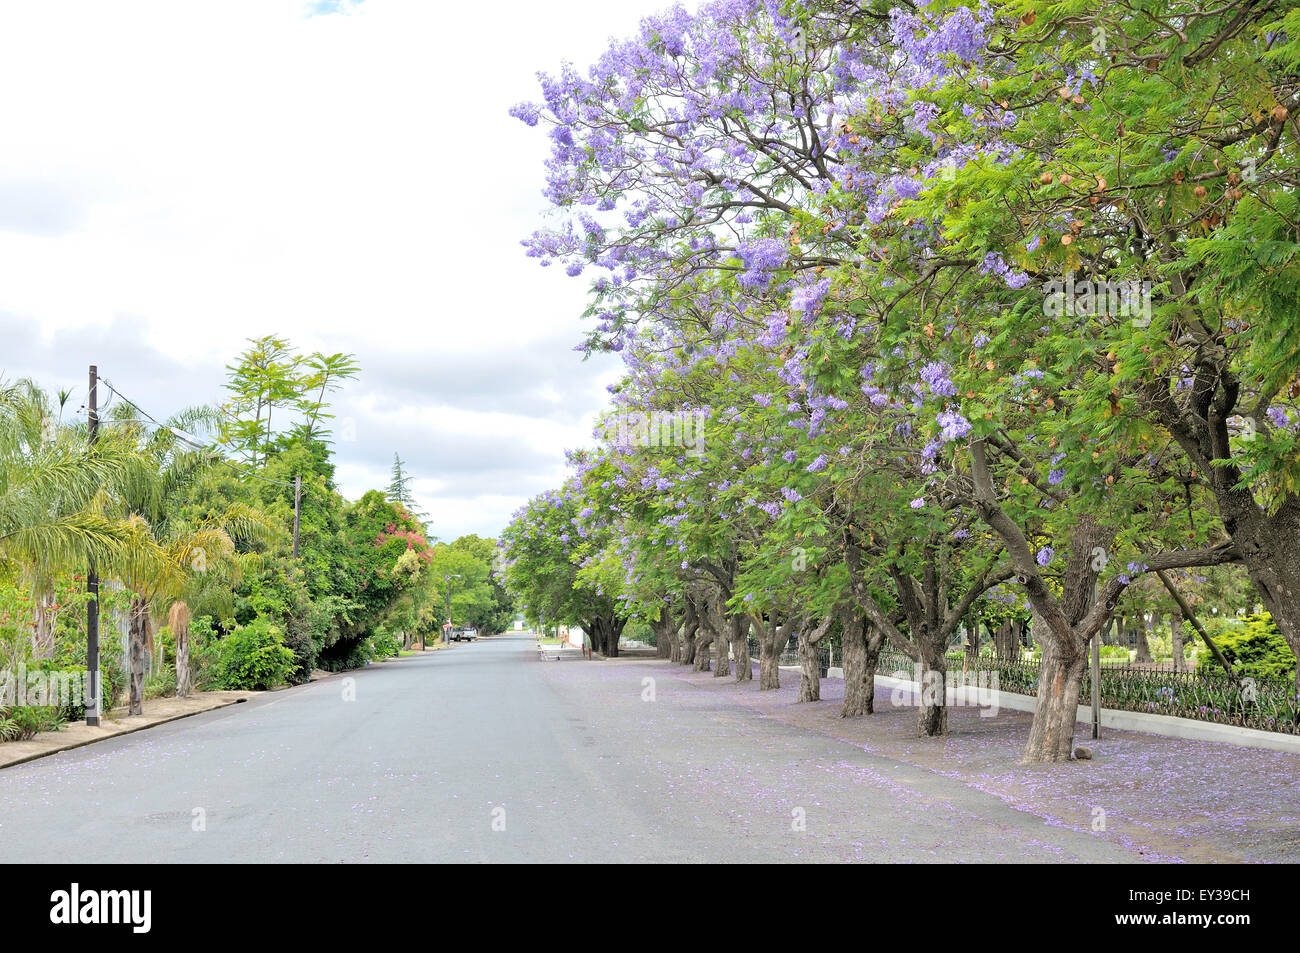 Street view of Rawsonville in the Western Cape Province of South Africa Stock Photo